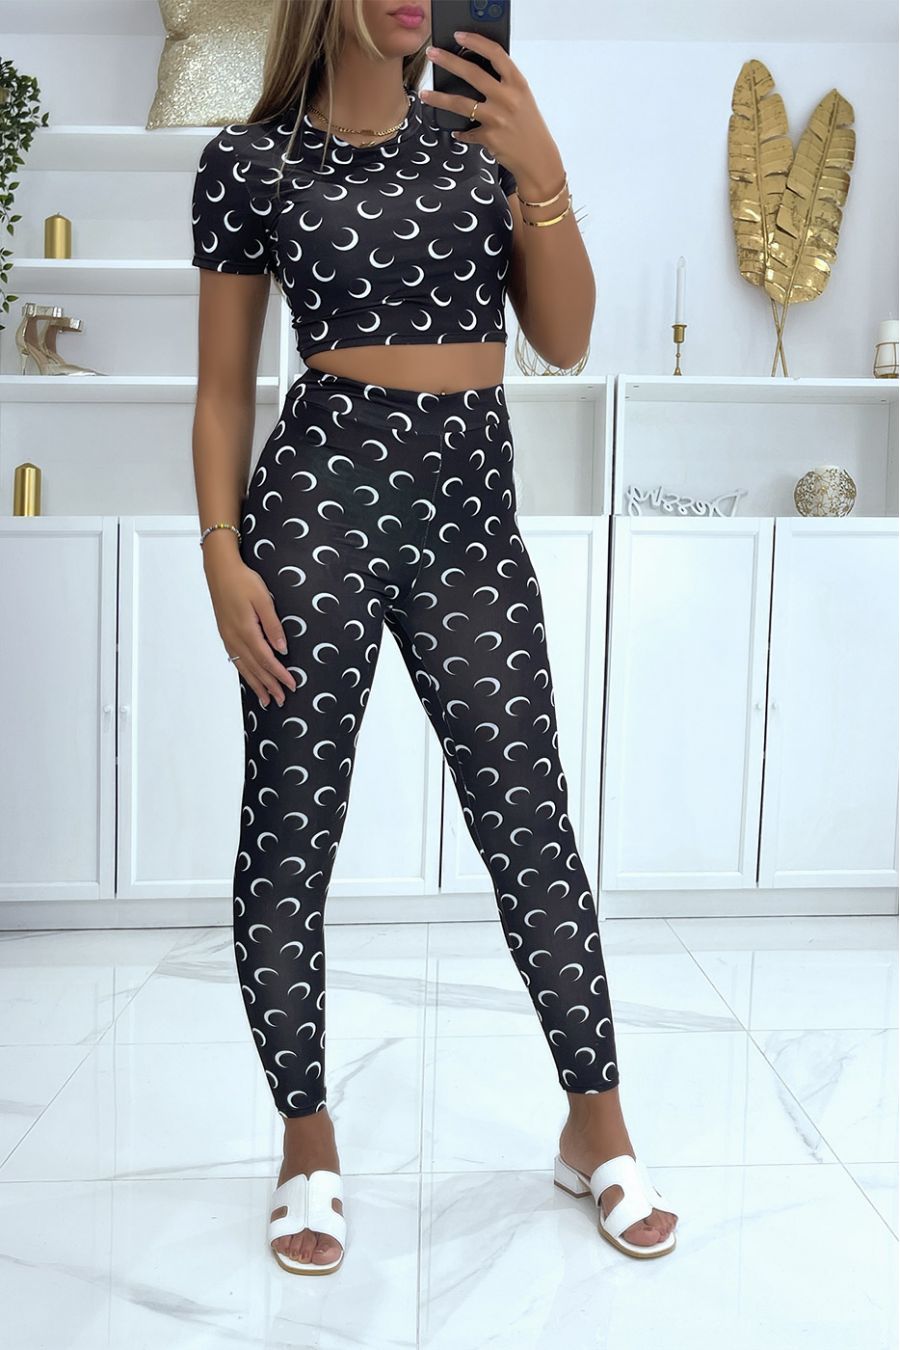 Luxury-inspired black crop top and leggings set with pretty crescent moon  patterns